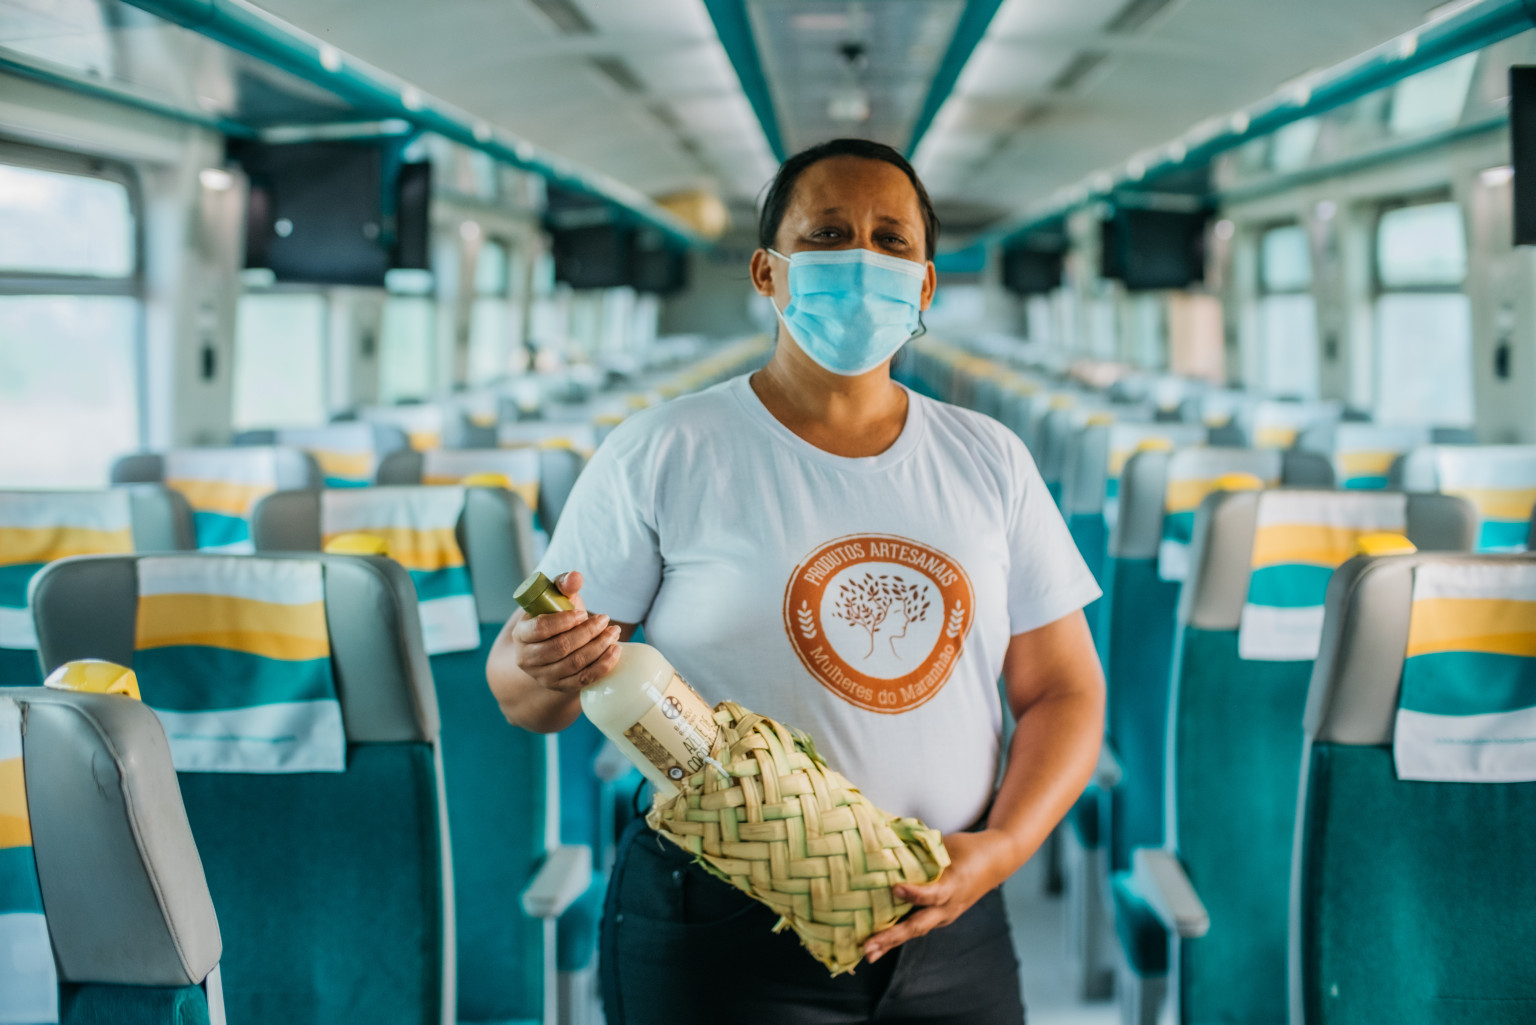 Photo of a participant from the Rede Mulheres do Maranhão (Women's Network of Maranhão) wearing a protective mask with the project's blouse securing a bottle of their product.  